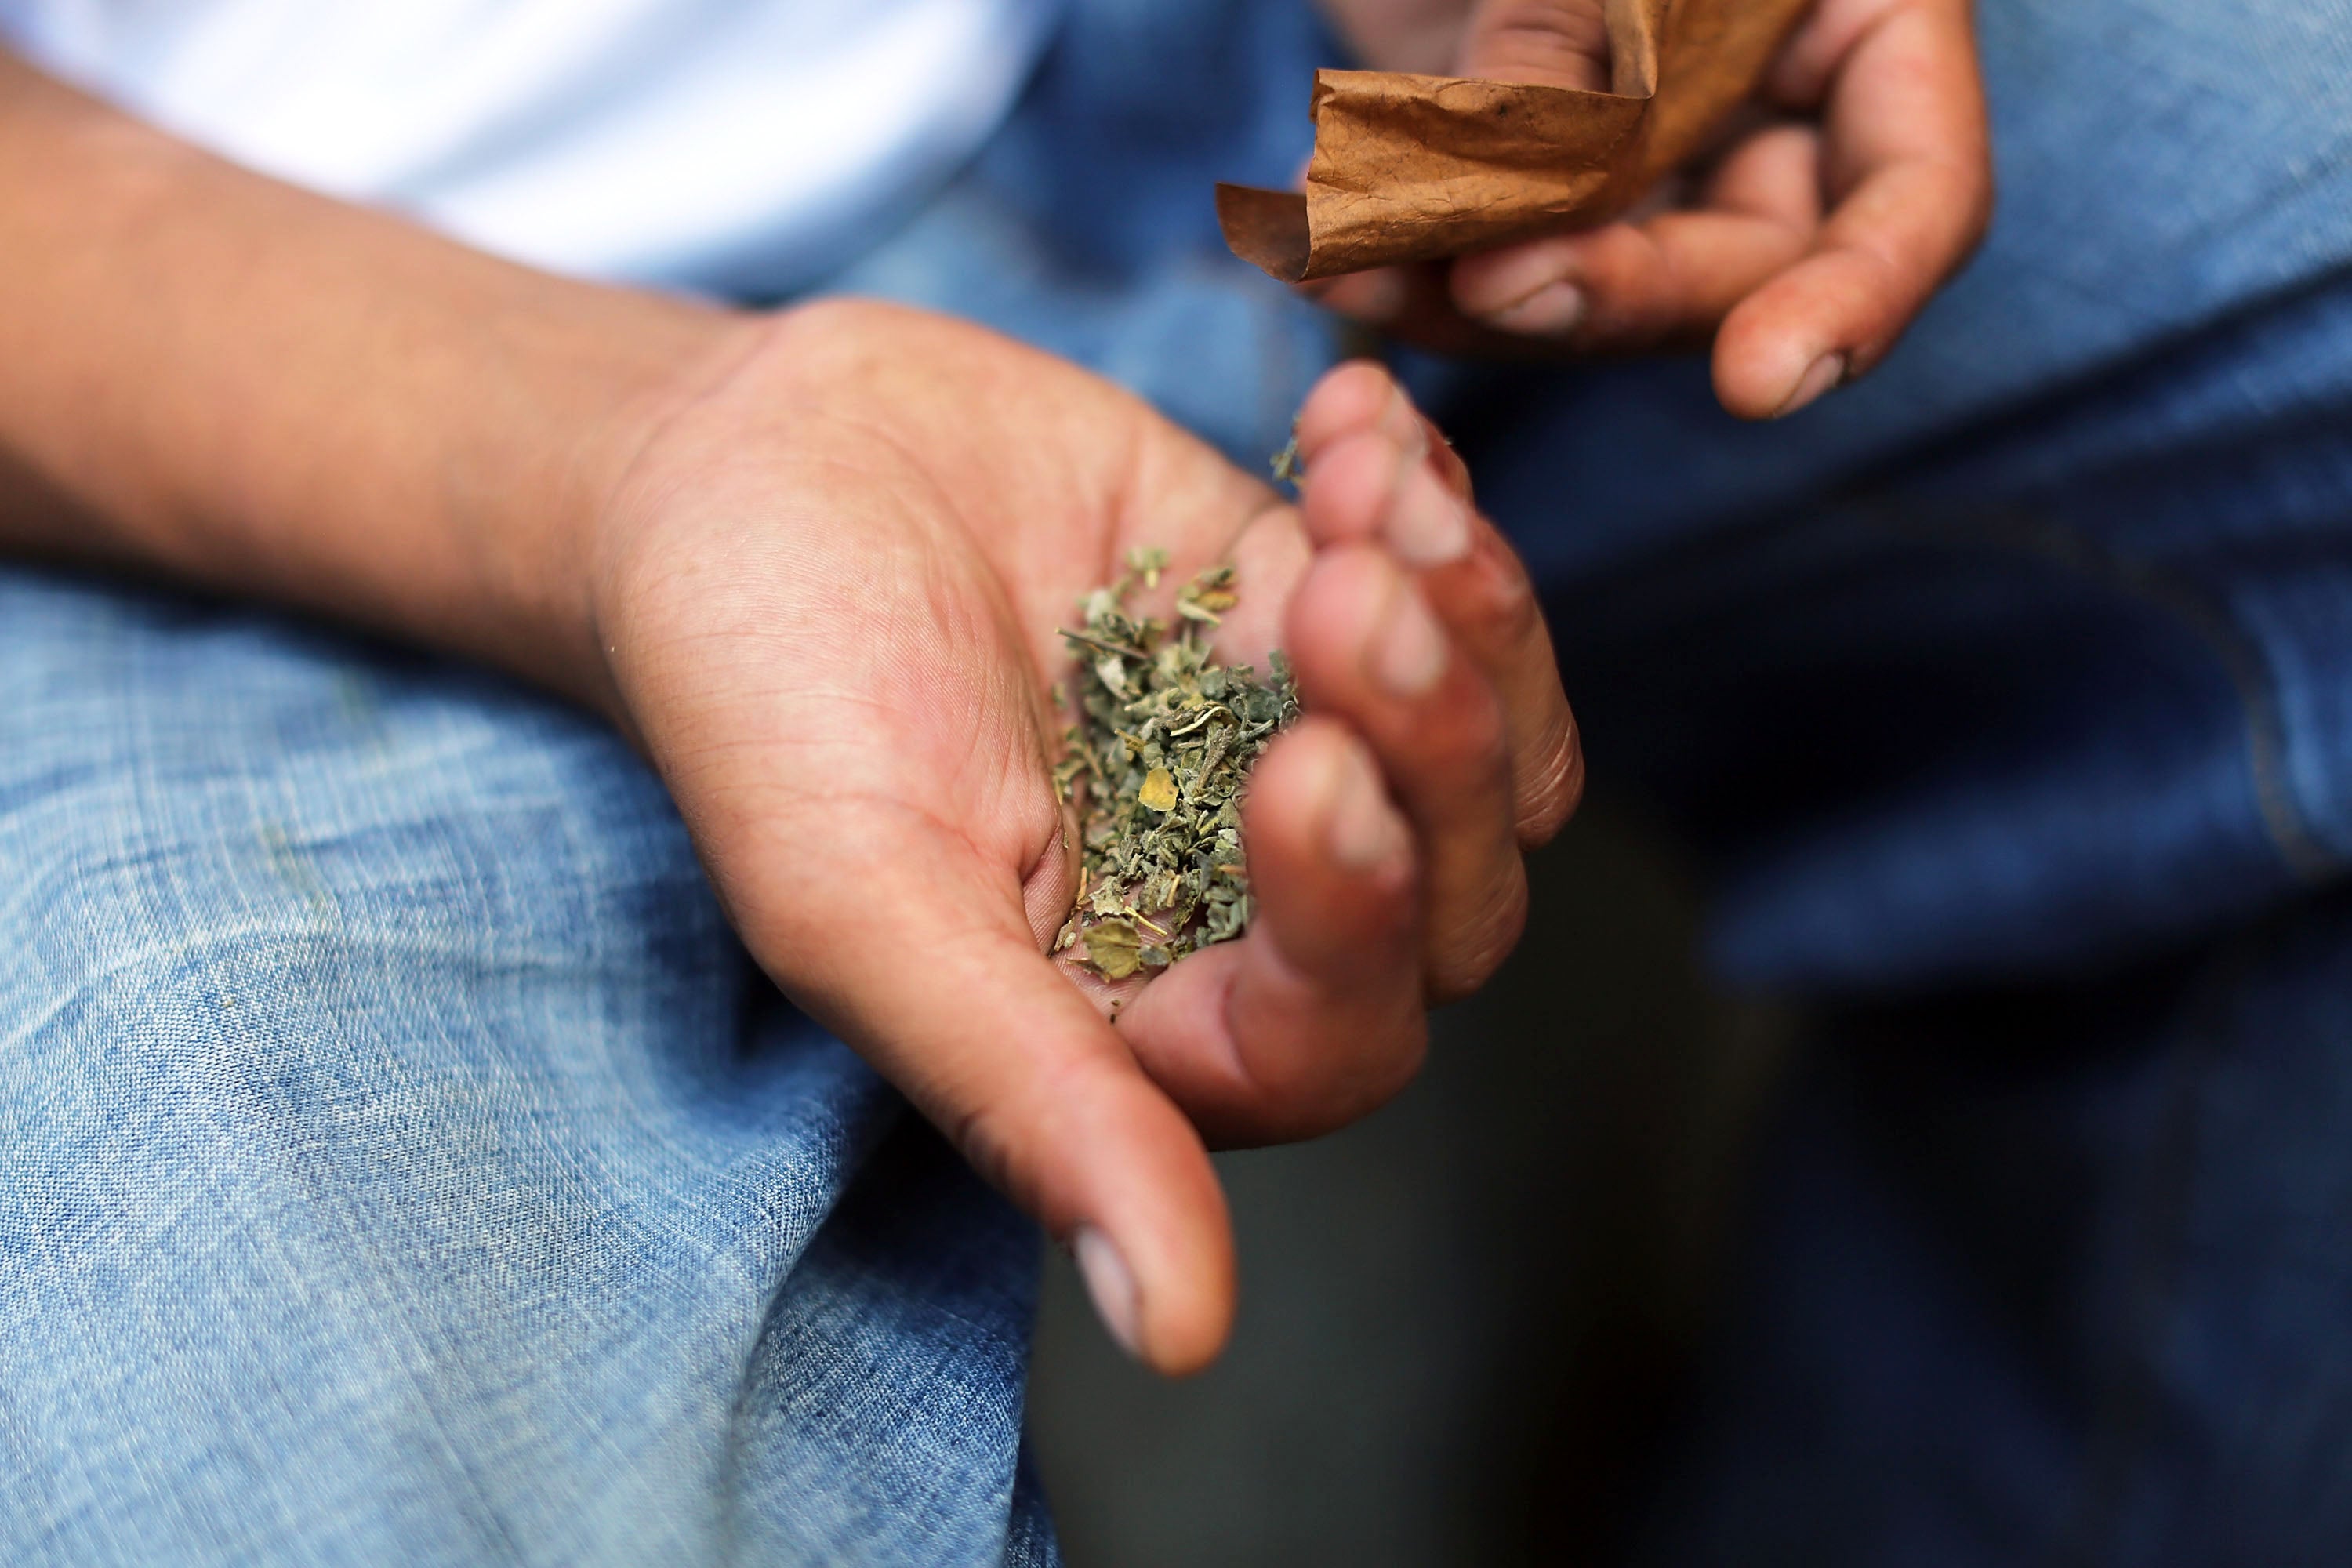 Thousands Hospitalized This Year Due to Fake Weed